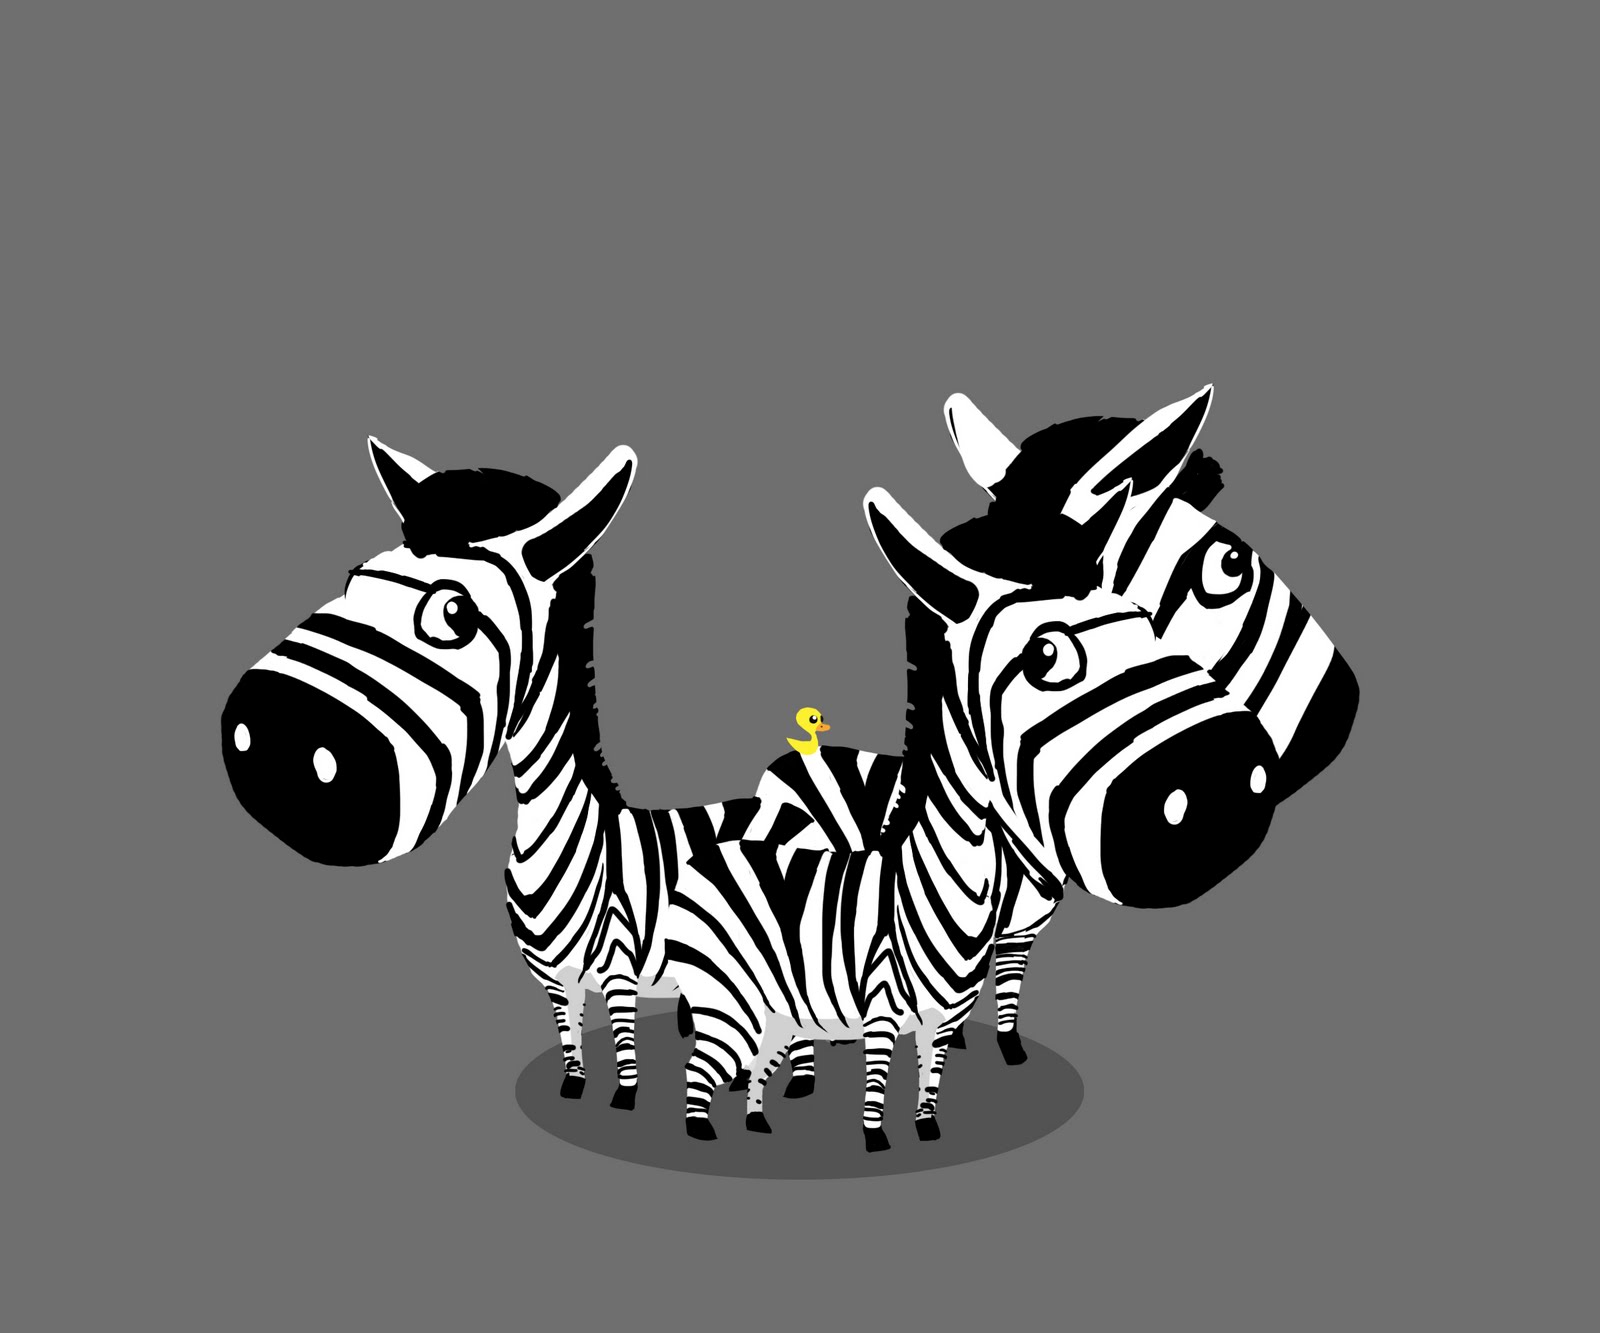 Gallery Images For Animated Zebra - ClipArt Best - ClipArt Best